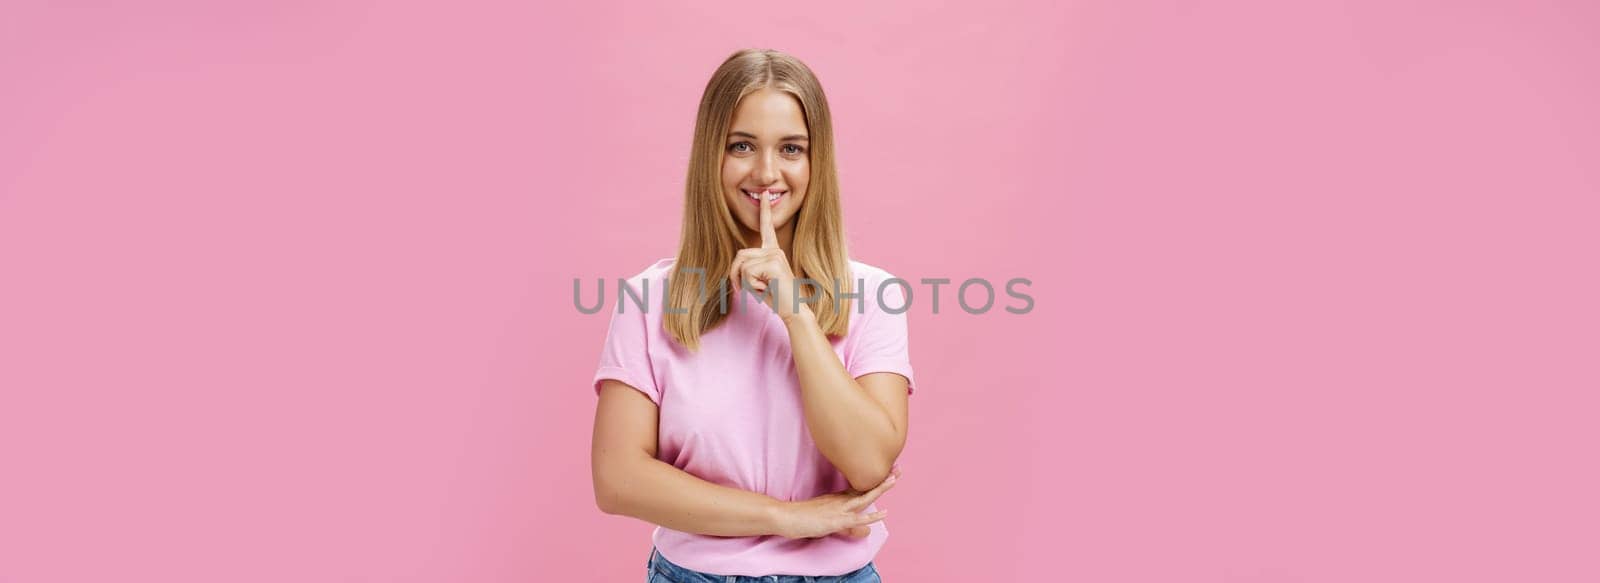 Shh keep it secret. Portrait of charismatic cheerful chubby girl with tanned skin and fair hair showing shush gesture with index finger over mouth smiling hiding surprise posing over pink background by Benzoix